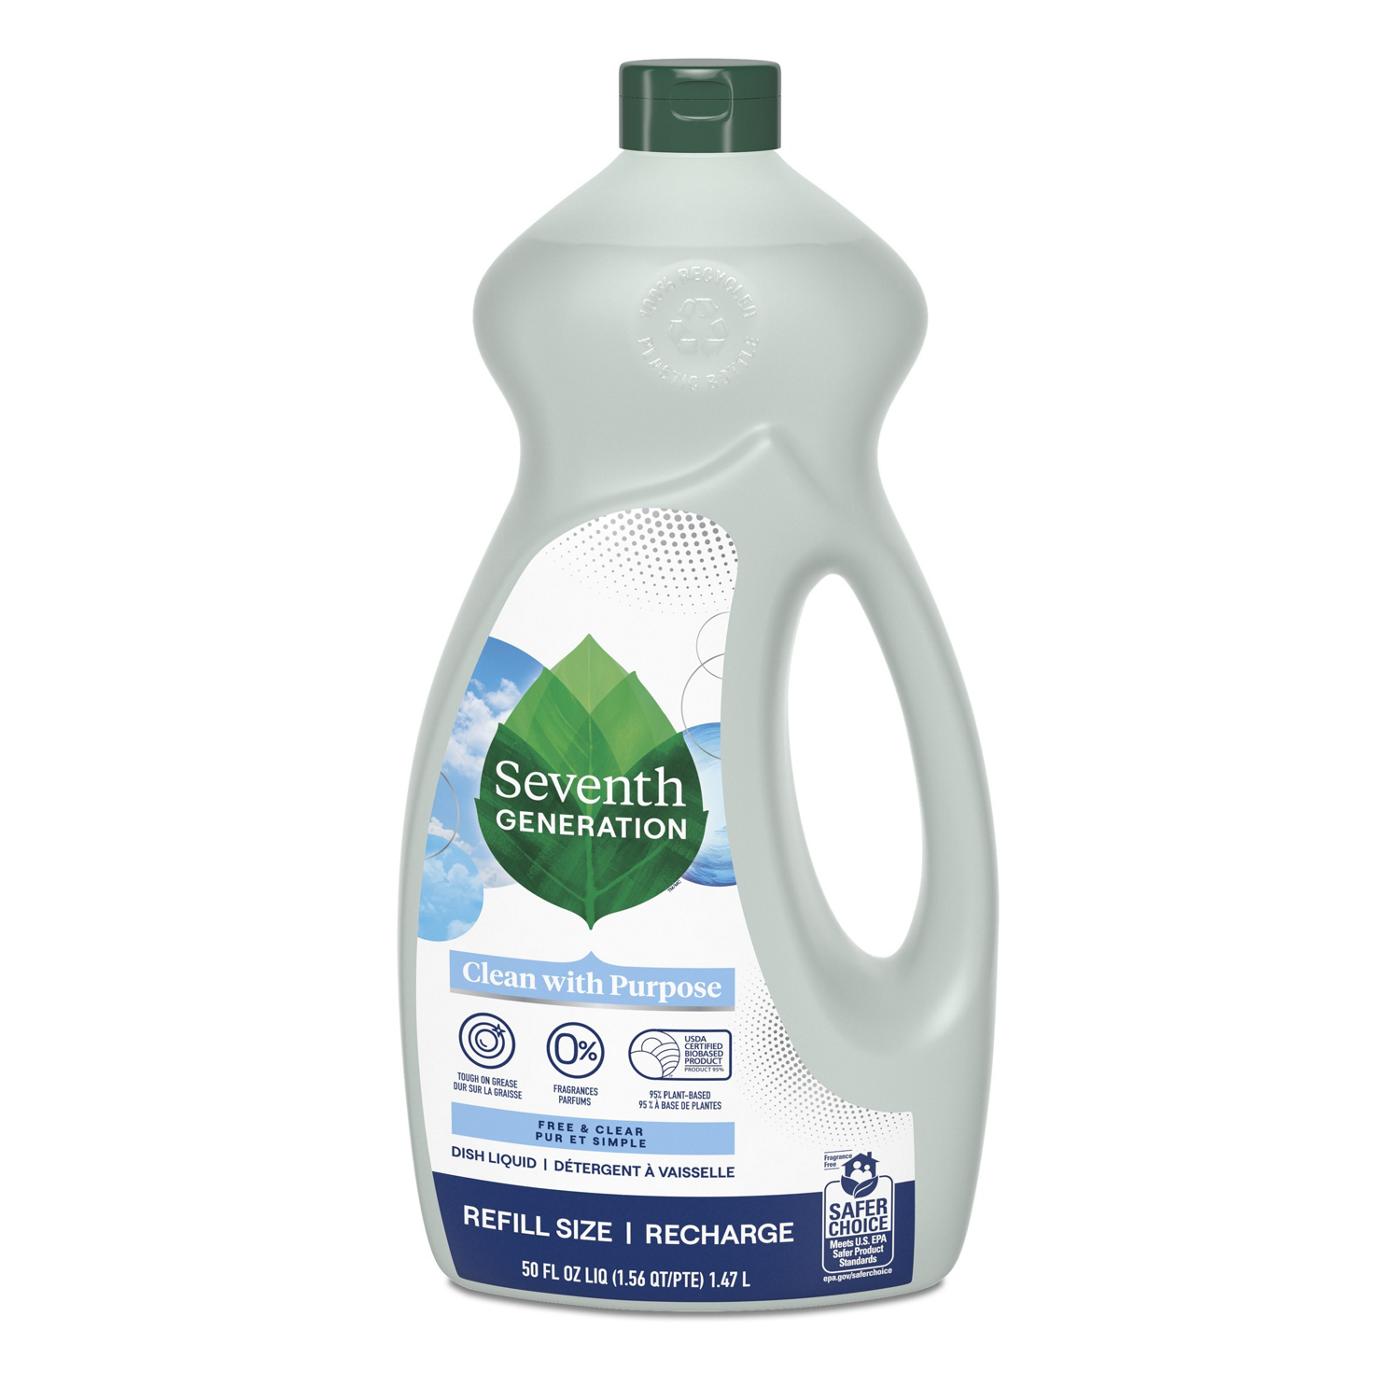 Seventh Generation Free & Clear Dish Liquid Soap; image 1 of 2